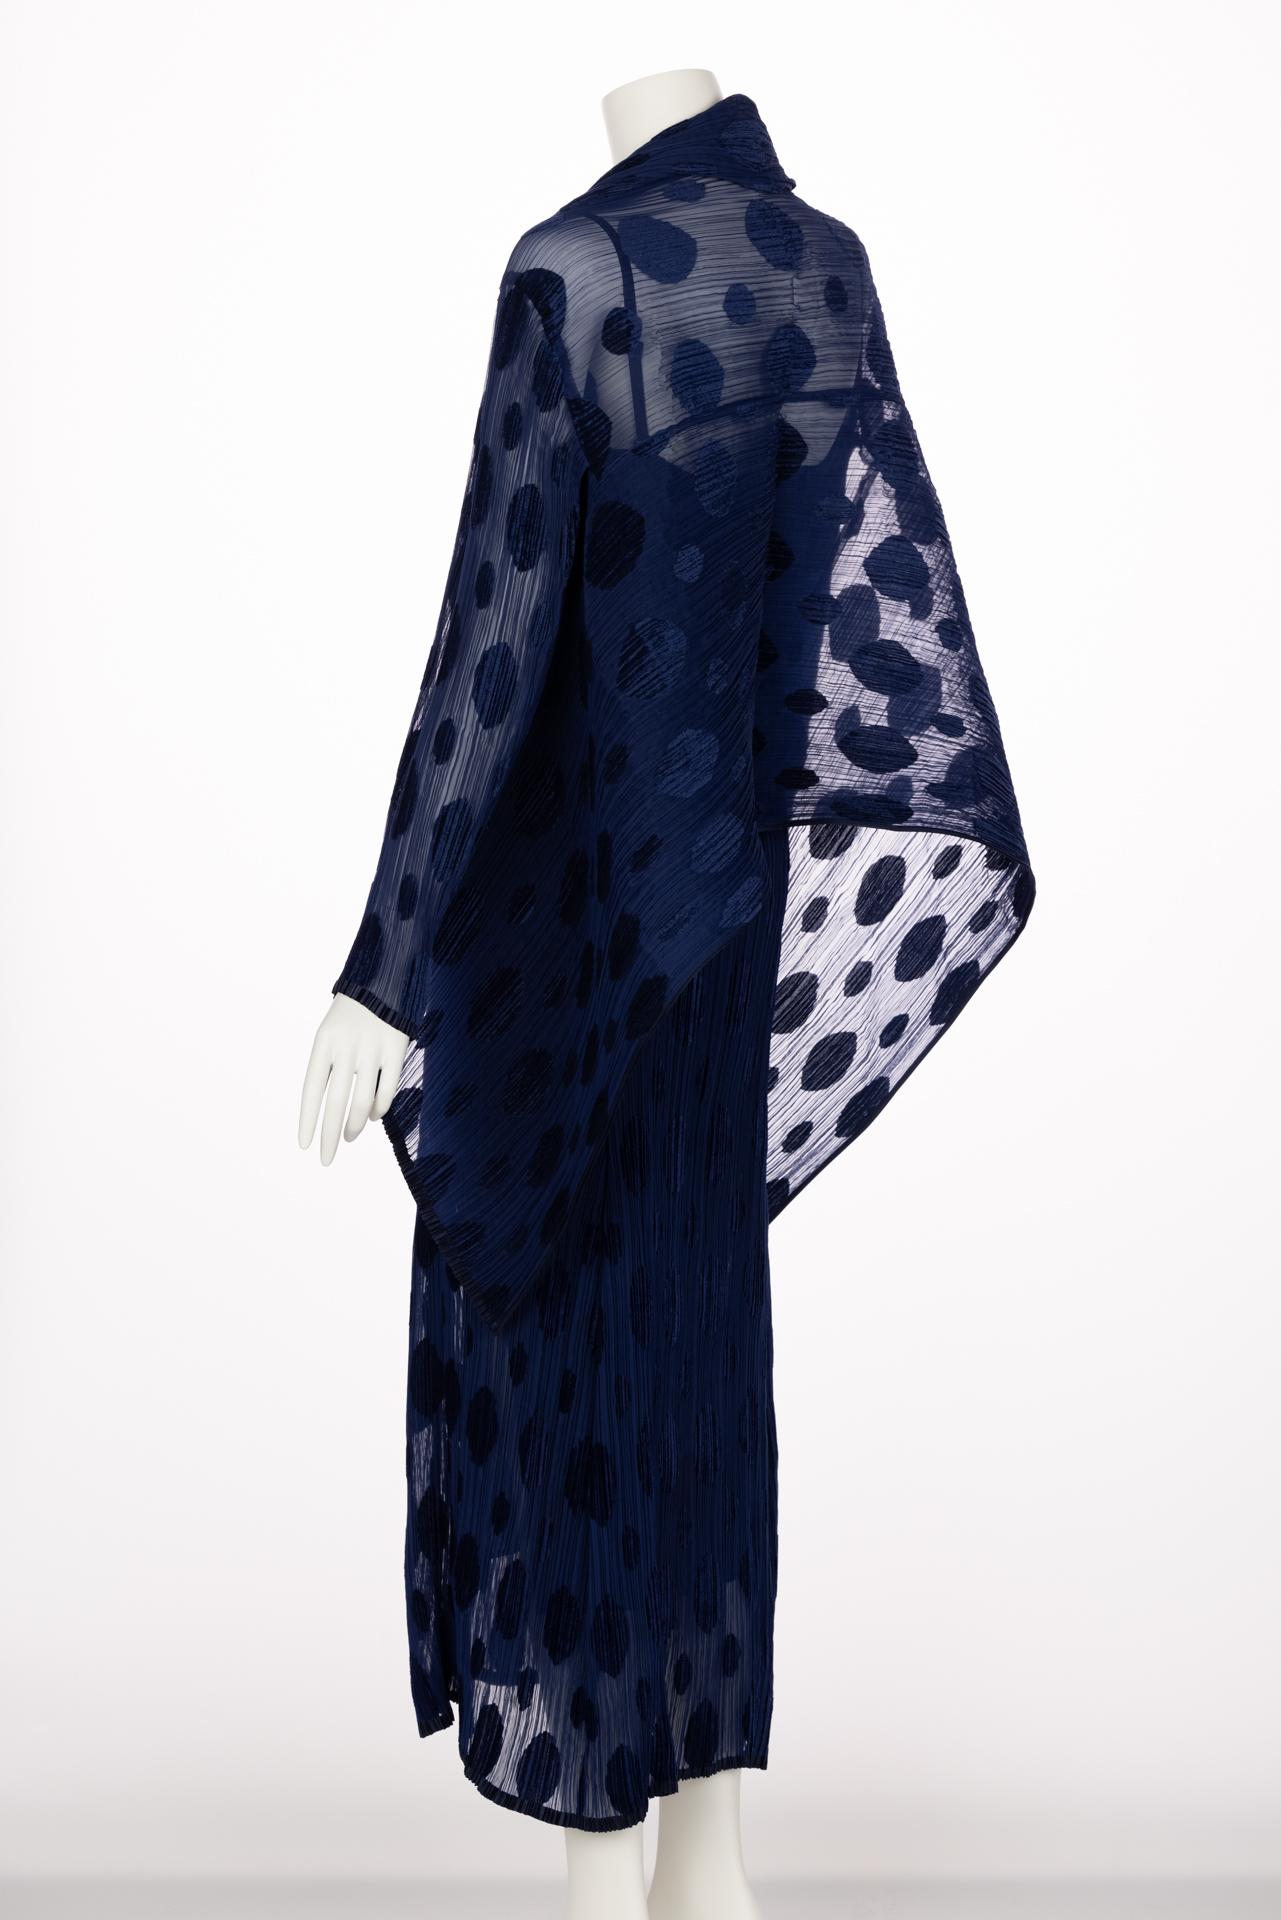 Issey Miyake Pleated Blue Polka Dot Dress & Jacket Set In Excellent Condition For Sale In Boca Raton, FL